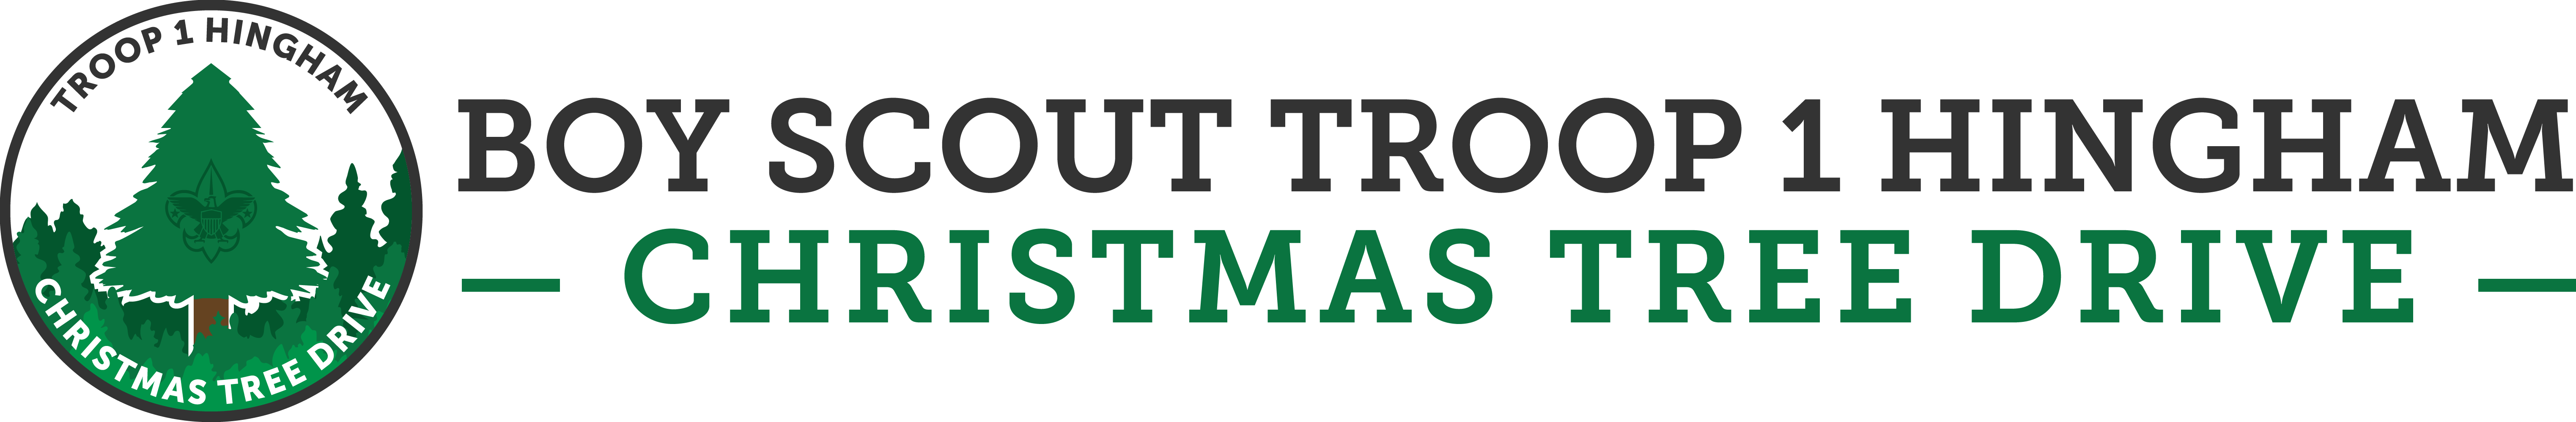 Boy Scout Troop 1 Hingham can pick up your Christmas tree and make things a little easier for you after Christmas! 